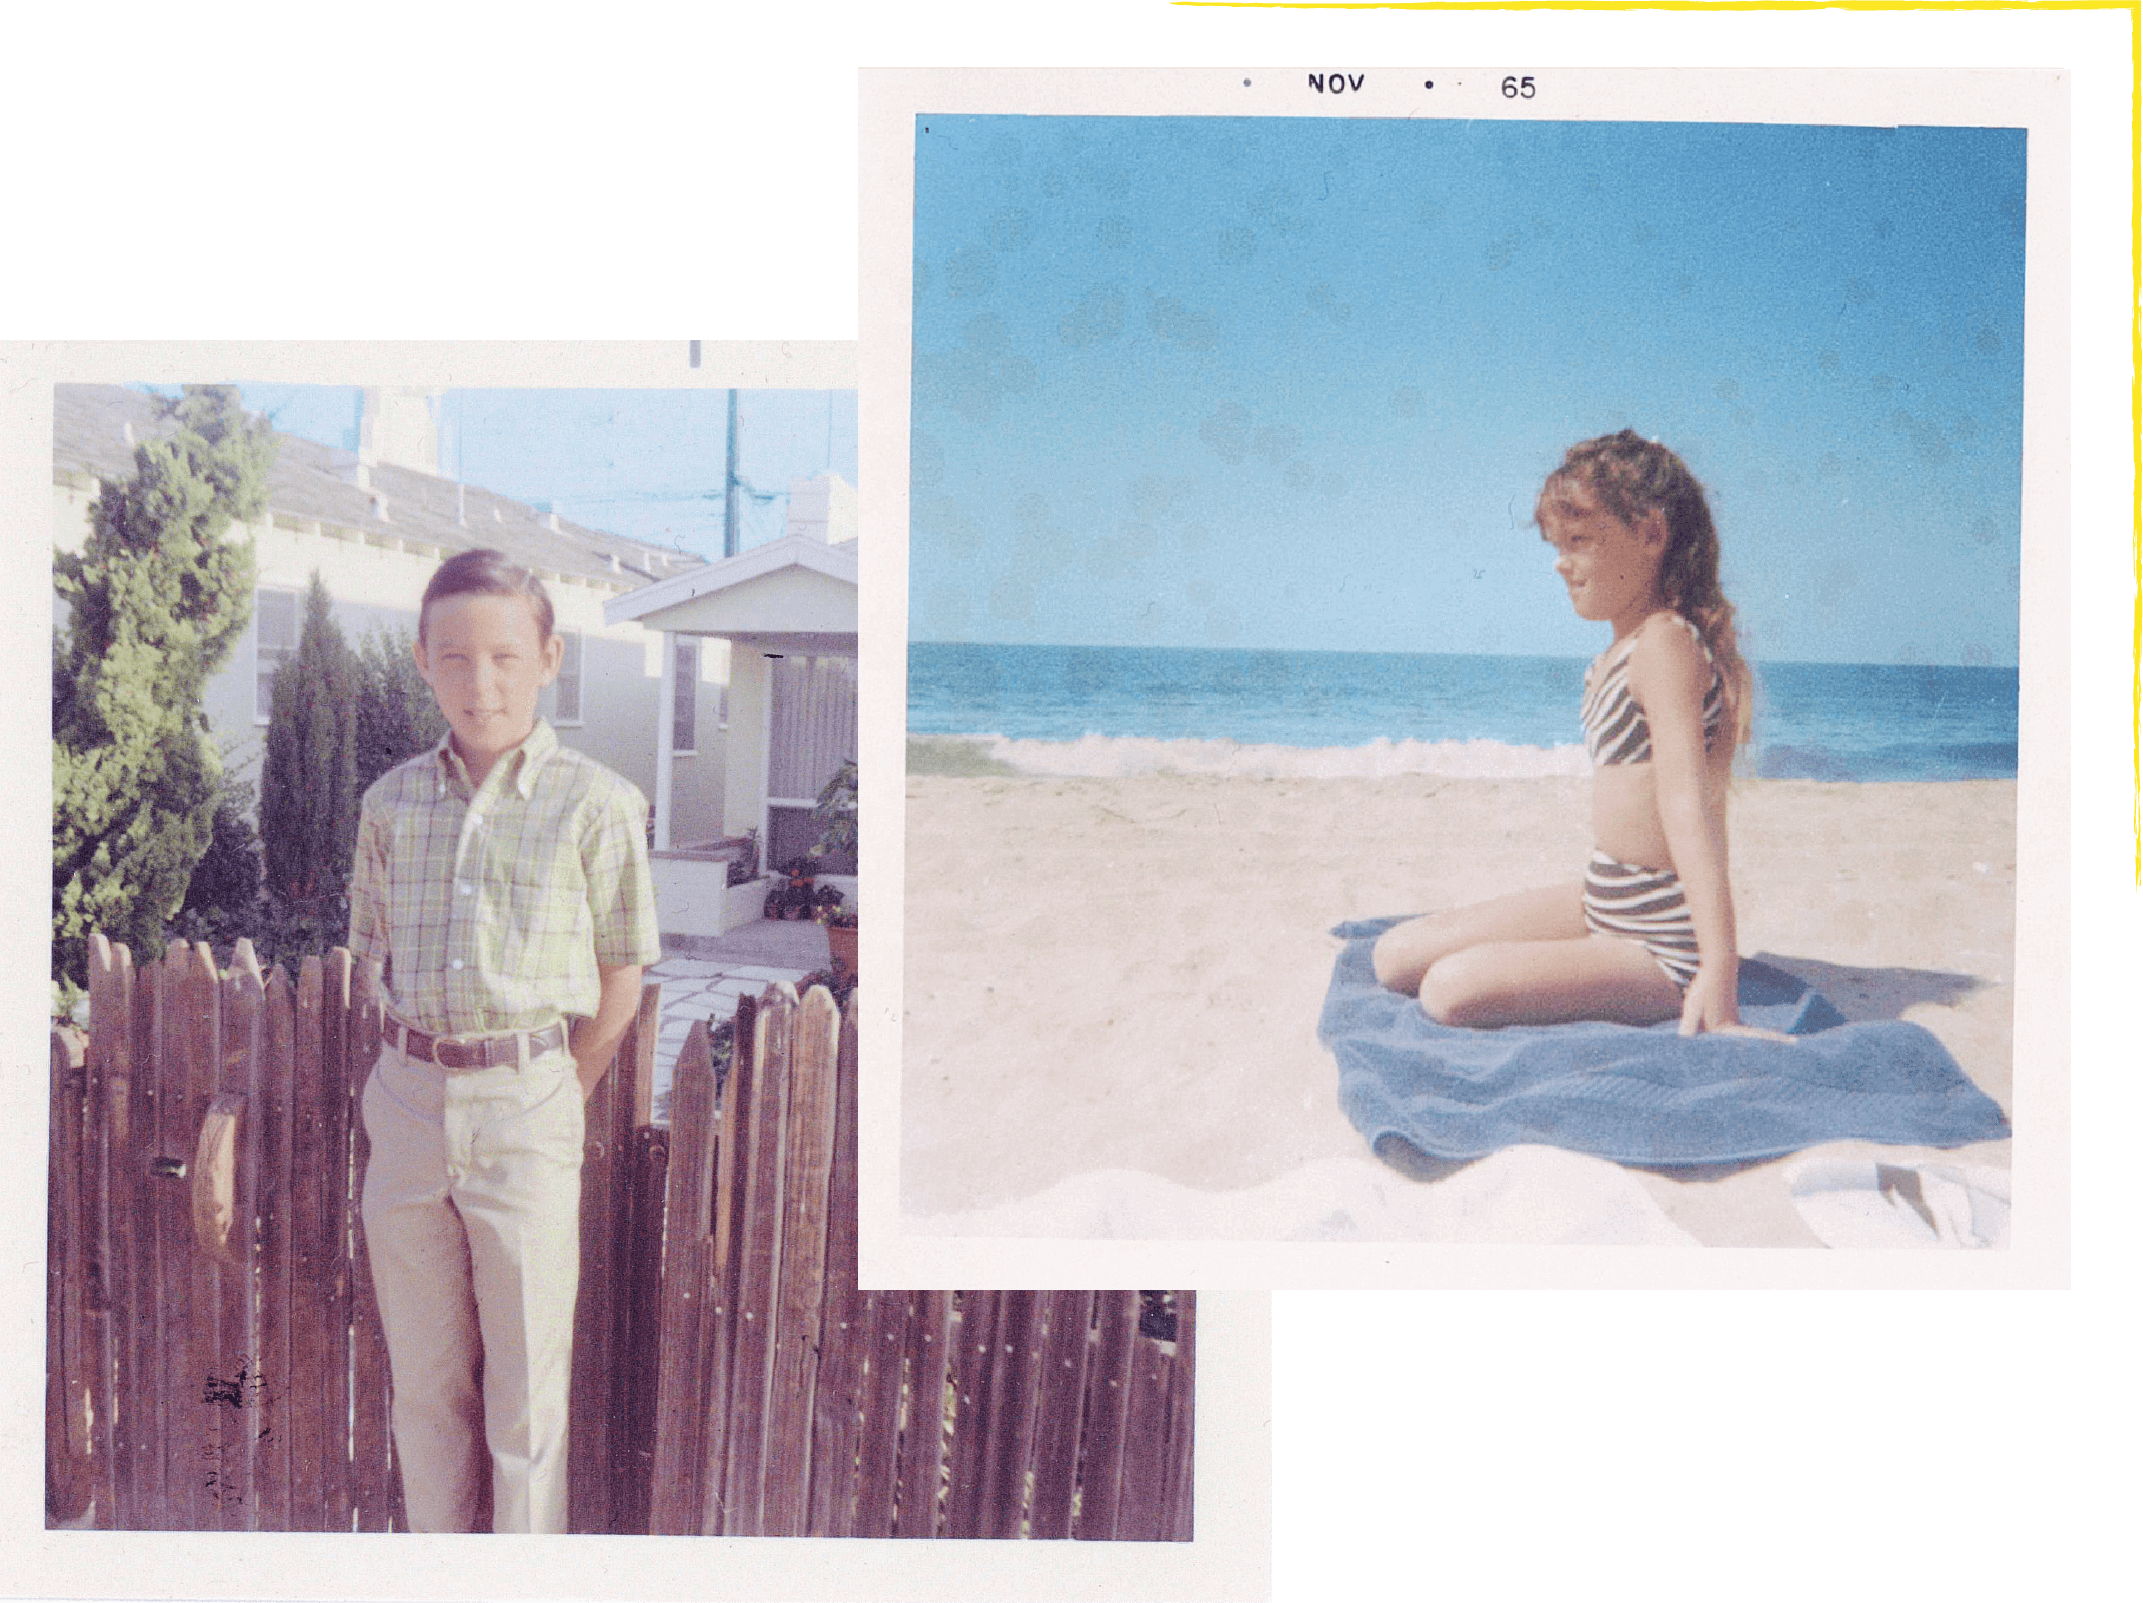 Mike and Connie growing up in Newport Beach